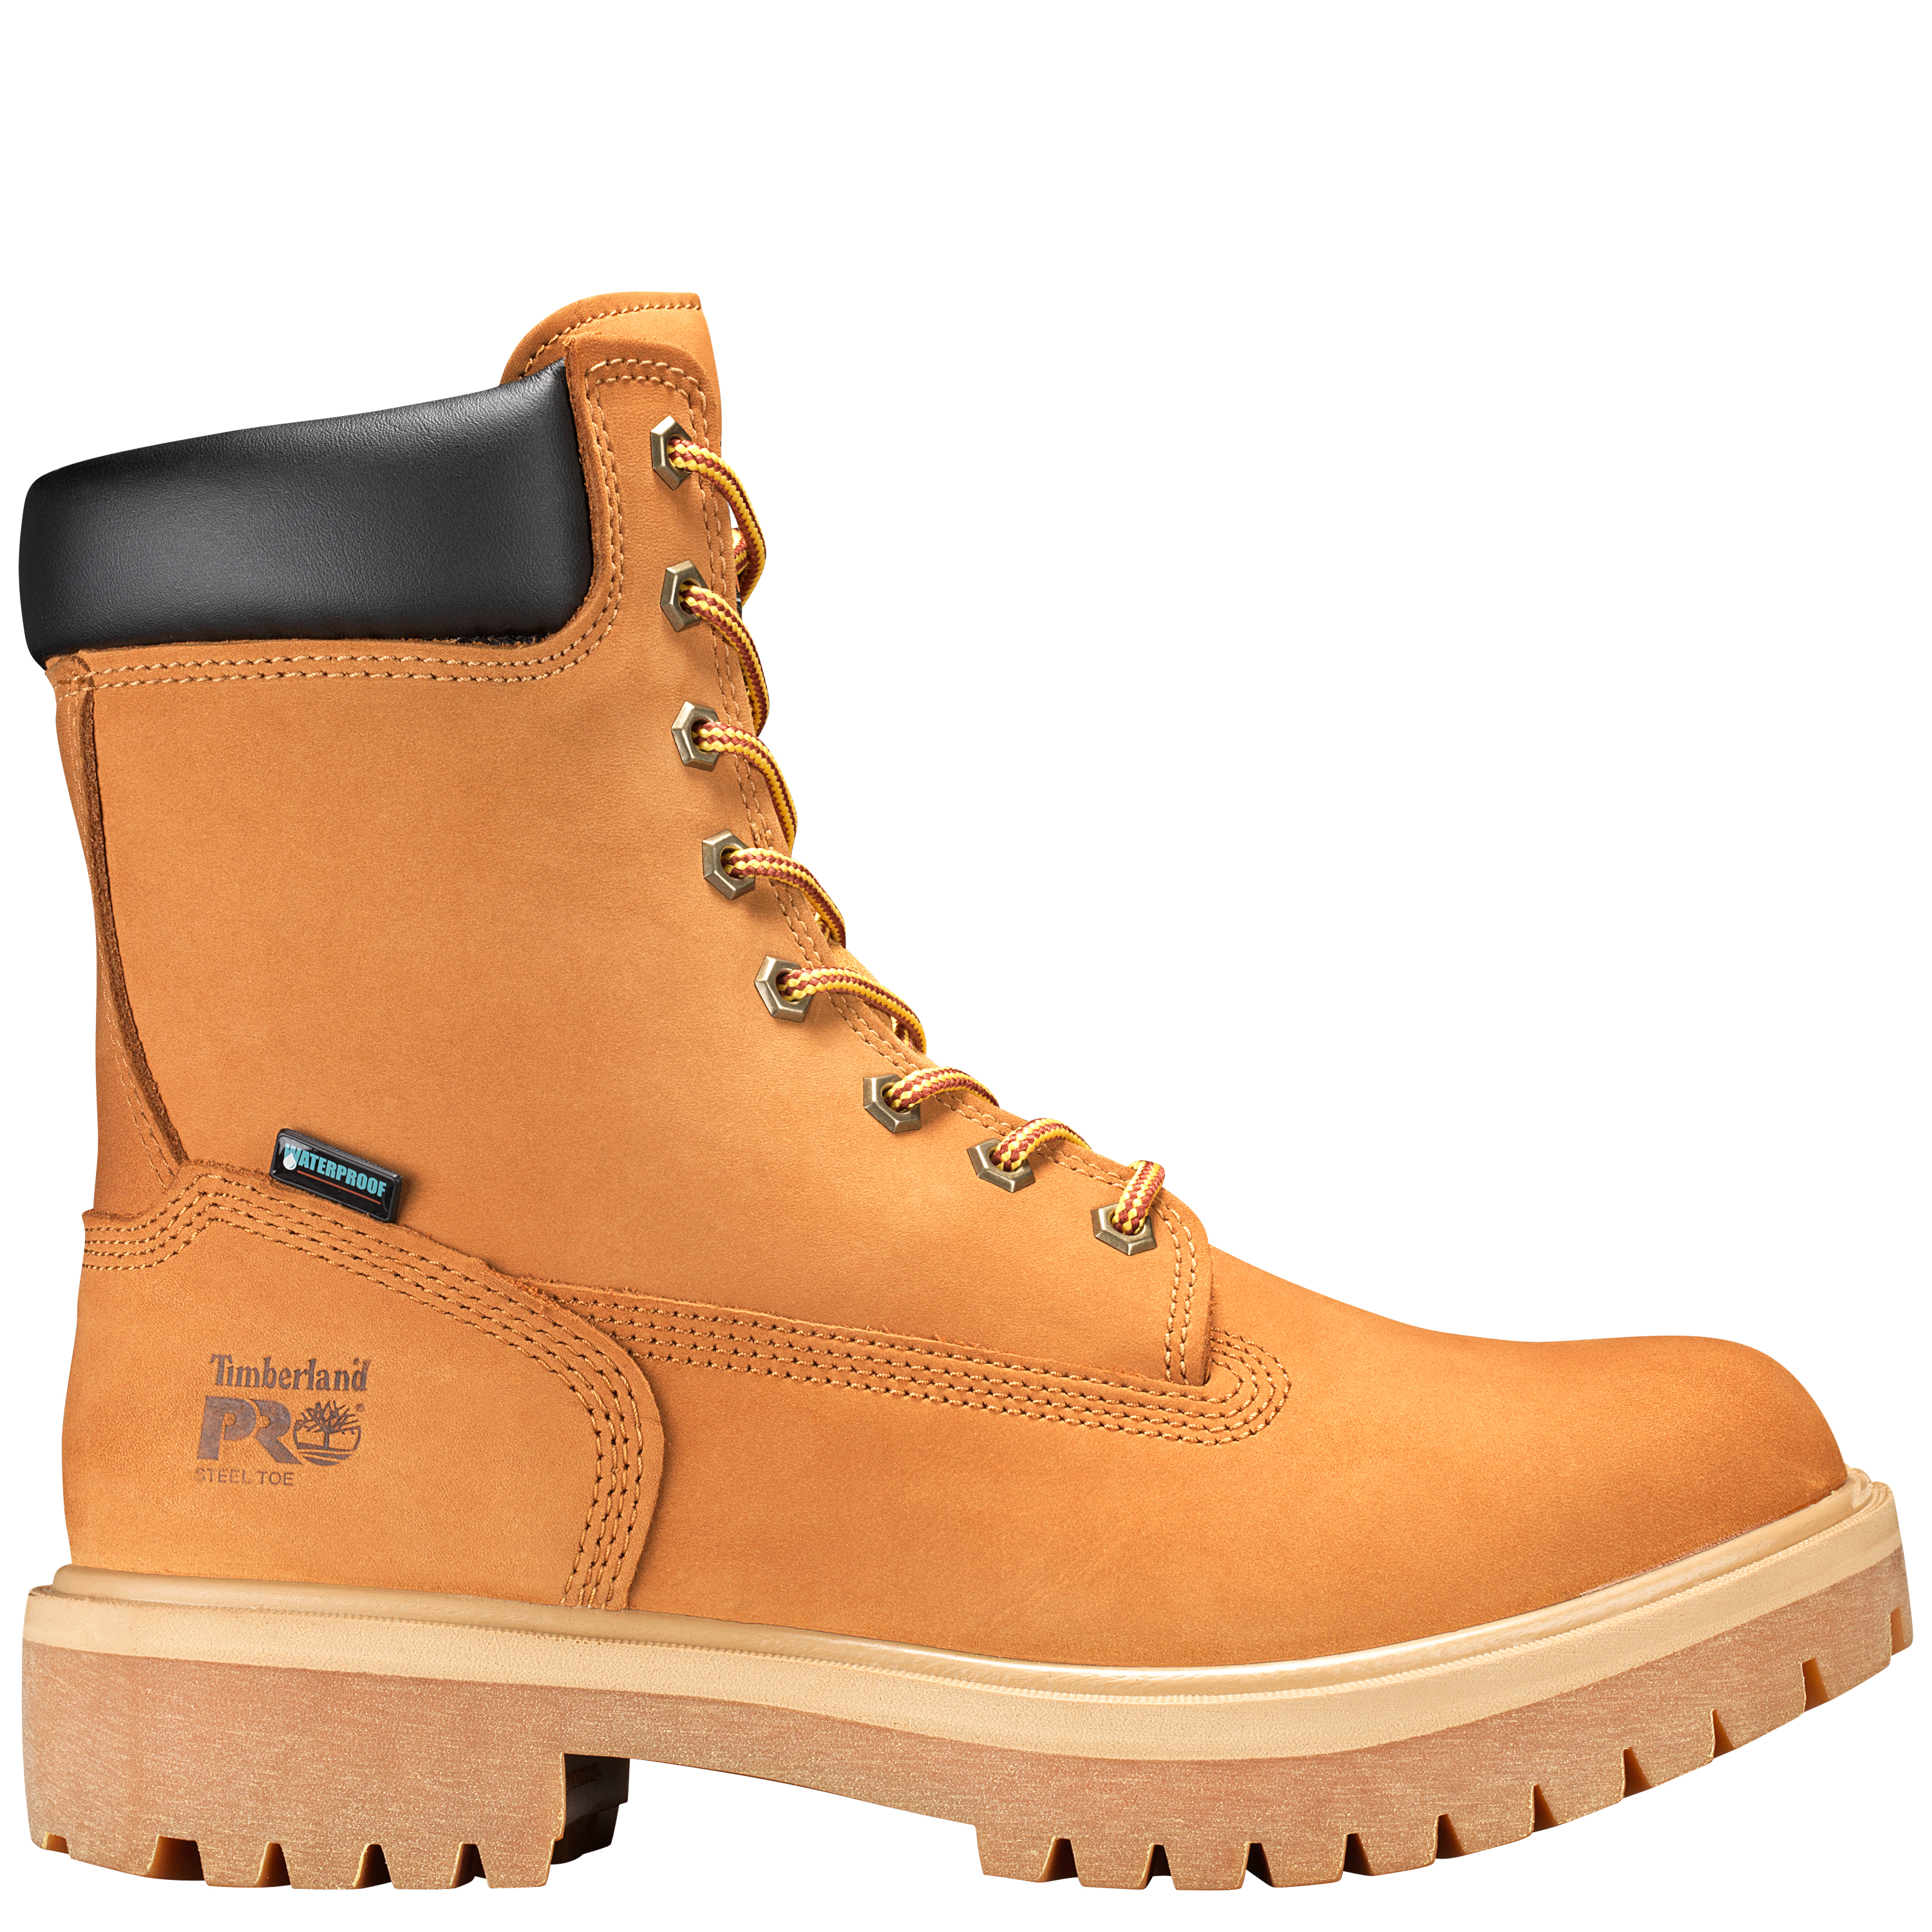 Boots Timberland Pro Men's Direct 